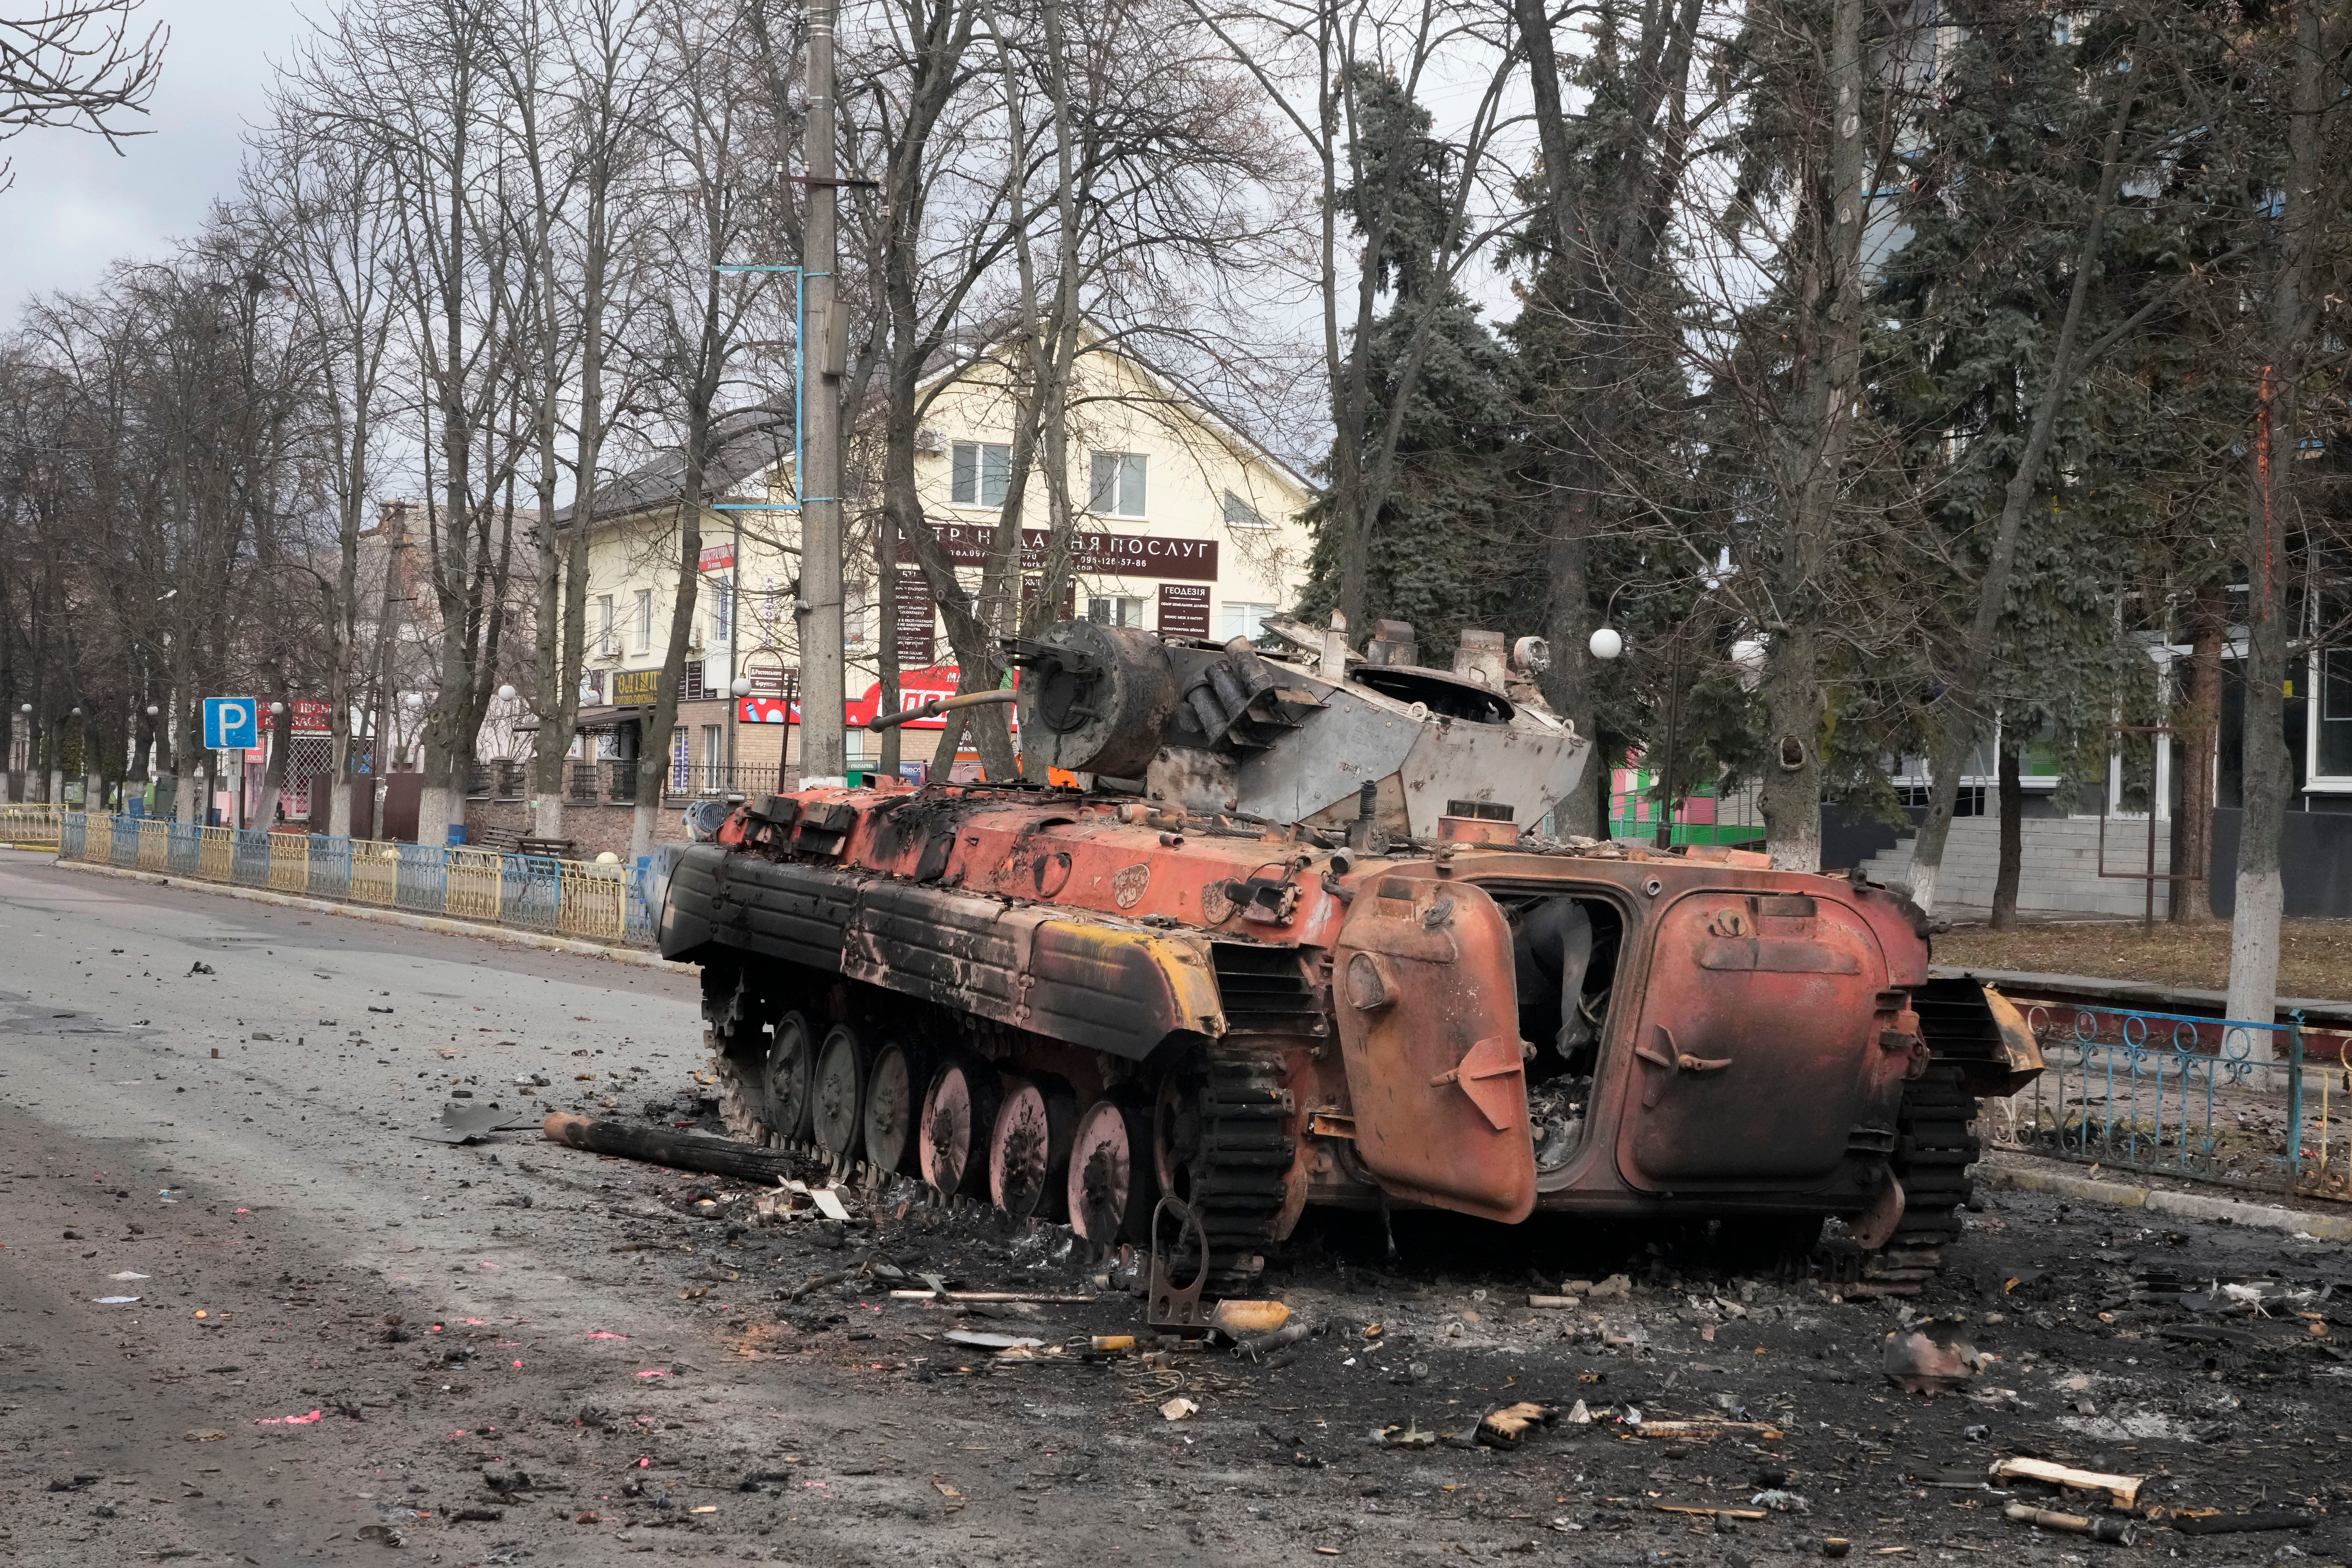 A destroyed armoured personnel carrier stands in the central square of the town of Makariv, 60 kilometres west of Kyiv, Ukraine, after a heavy night battle (Efrem Lukatsky/AP)